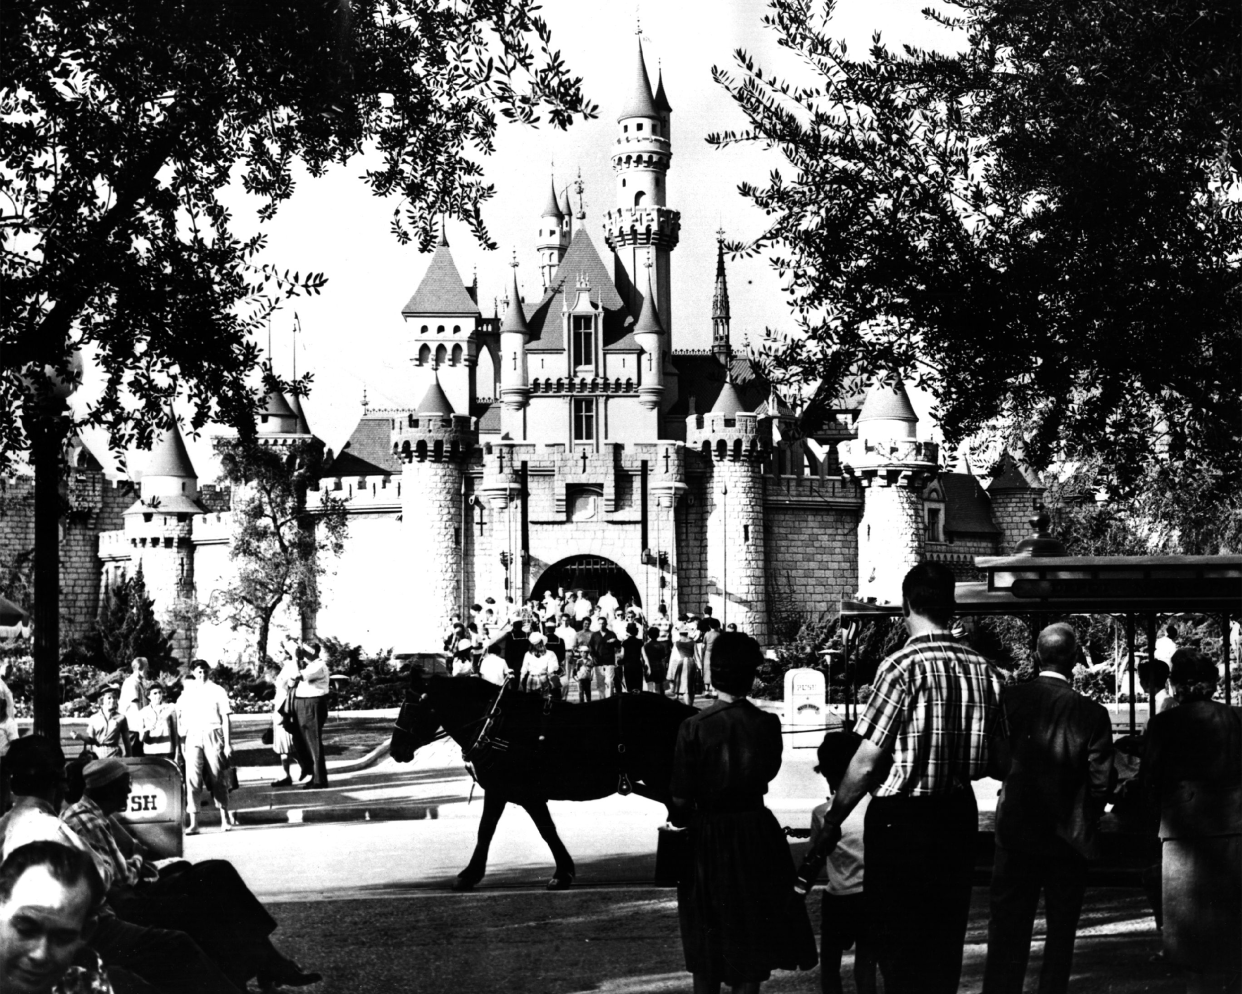 Tourists visiting the medieval 'Sleeping Beauty Castle' at Disneyland.